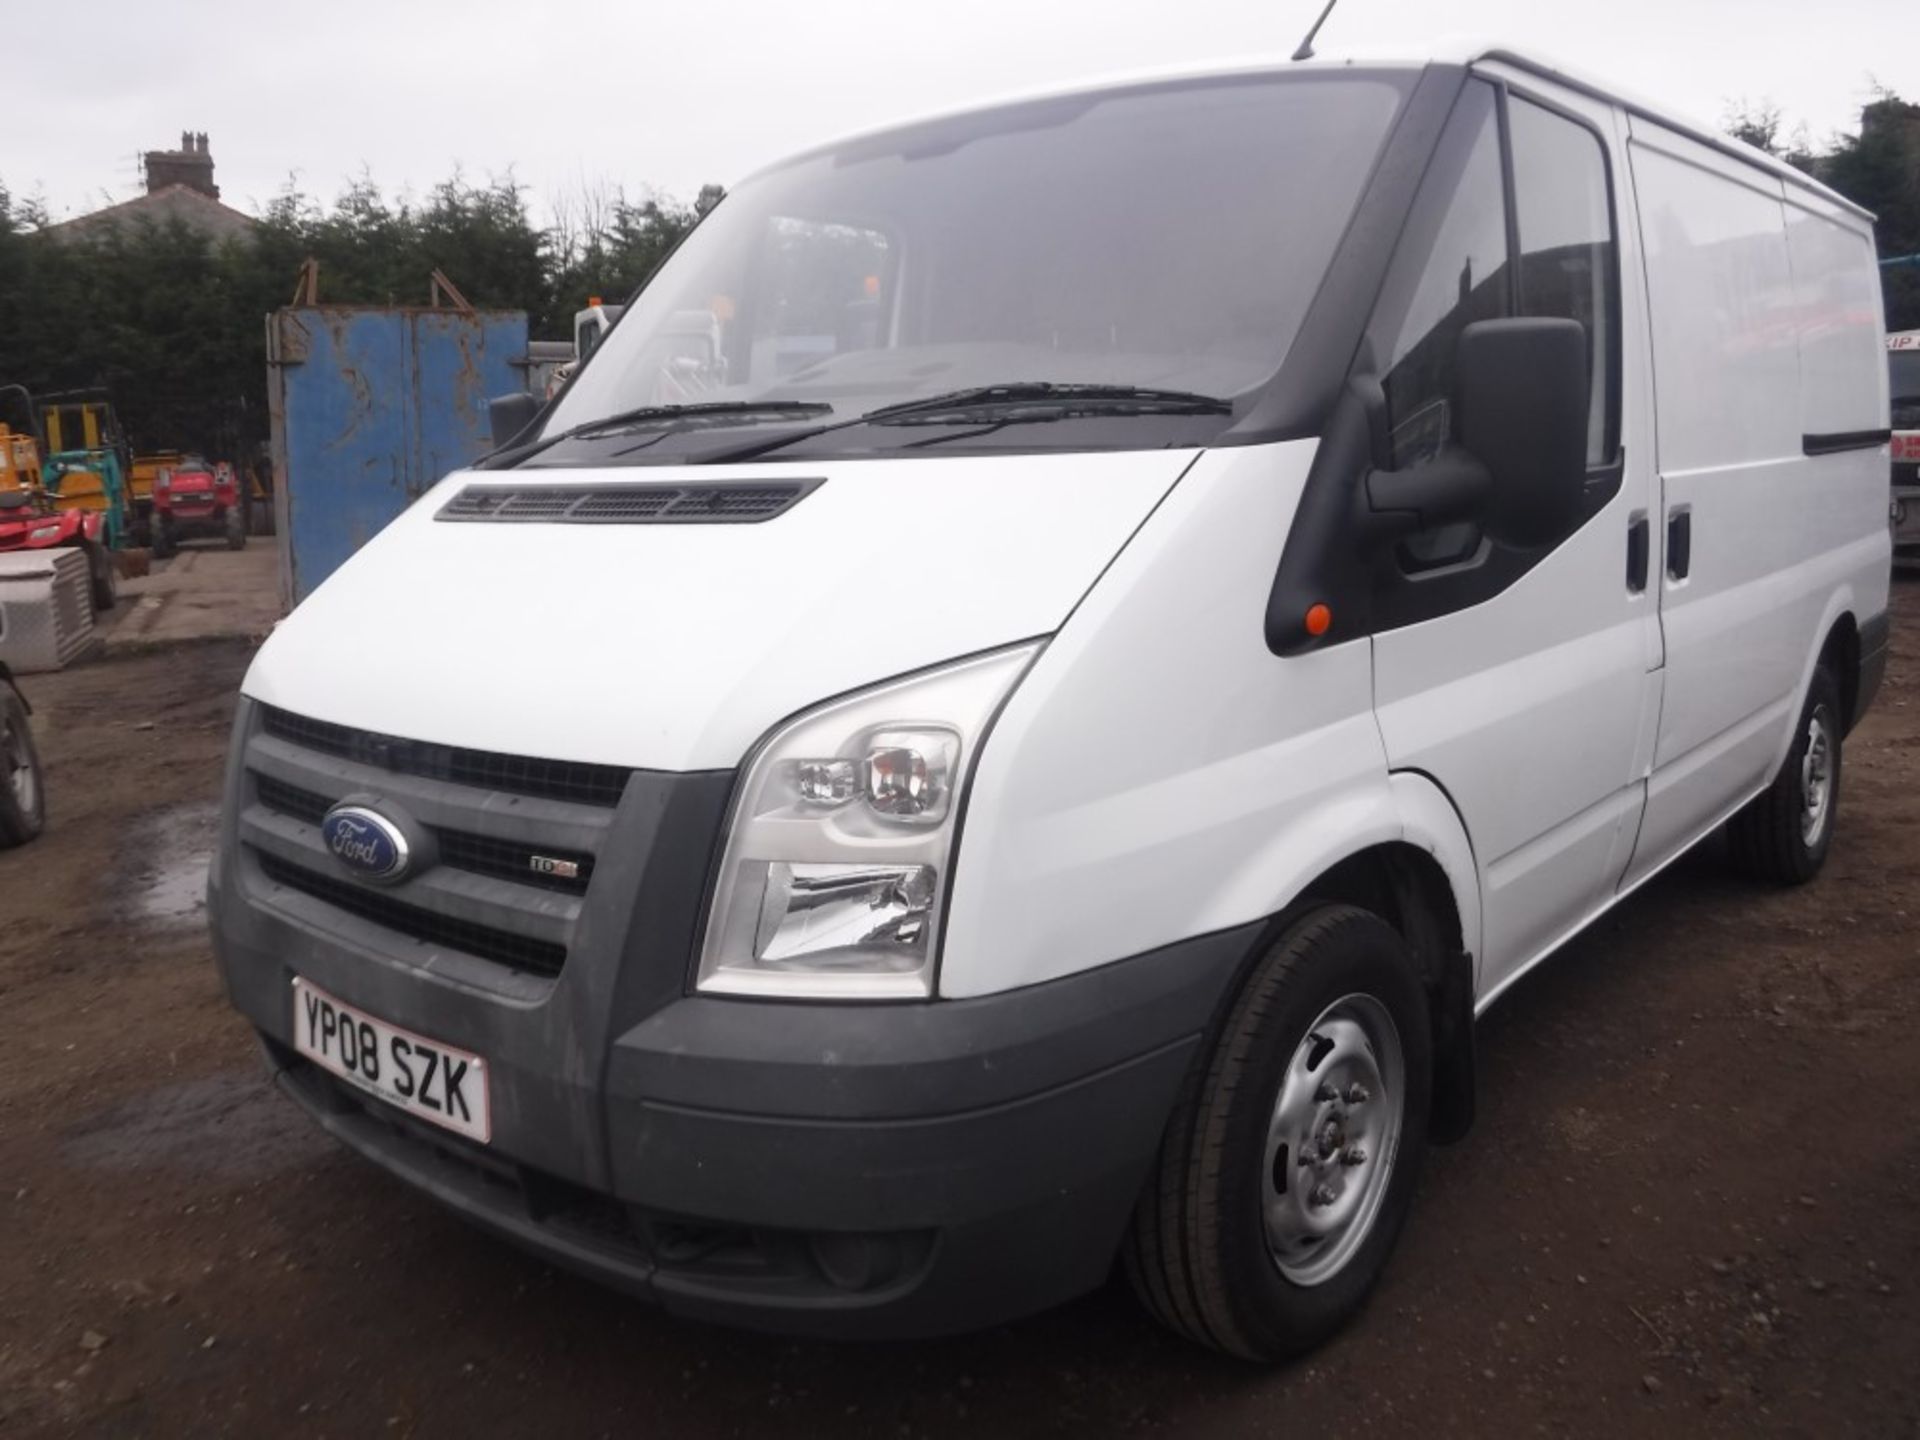 08 reg FORD TRANSIT 85 T260 S FWD, 1ST REG 06/08, TEST 10/17, 96271M NOT WARRANTED, V5 HERE, 2 - Image 2 of 5